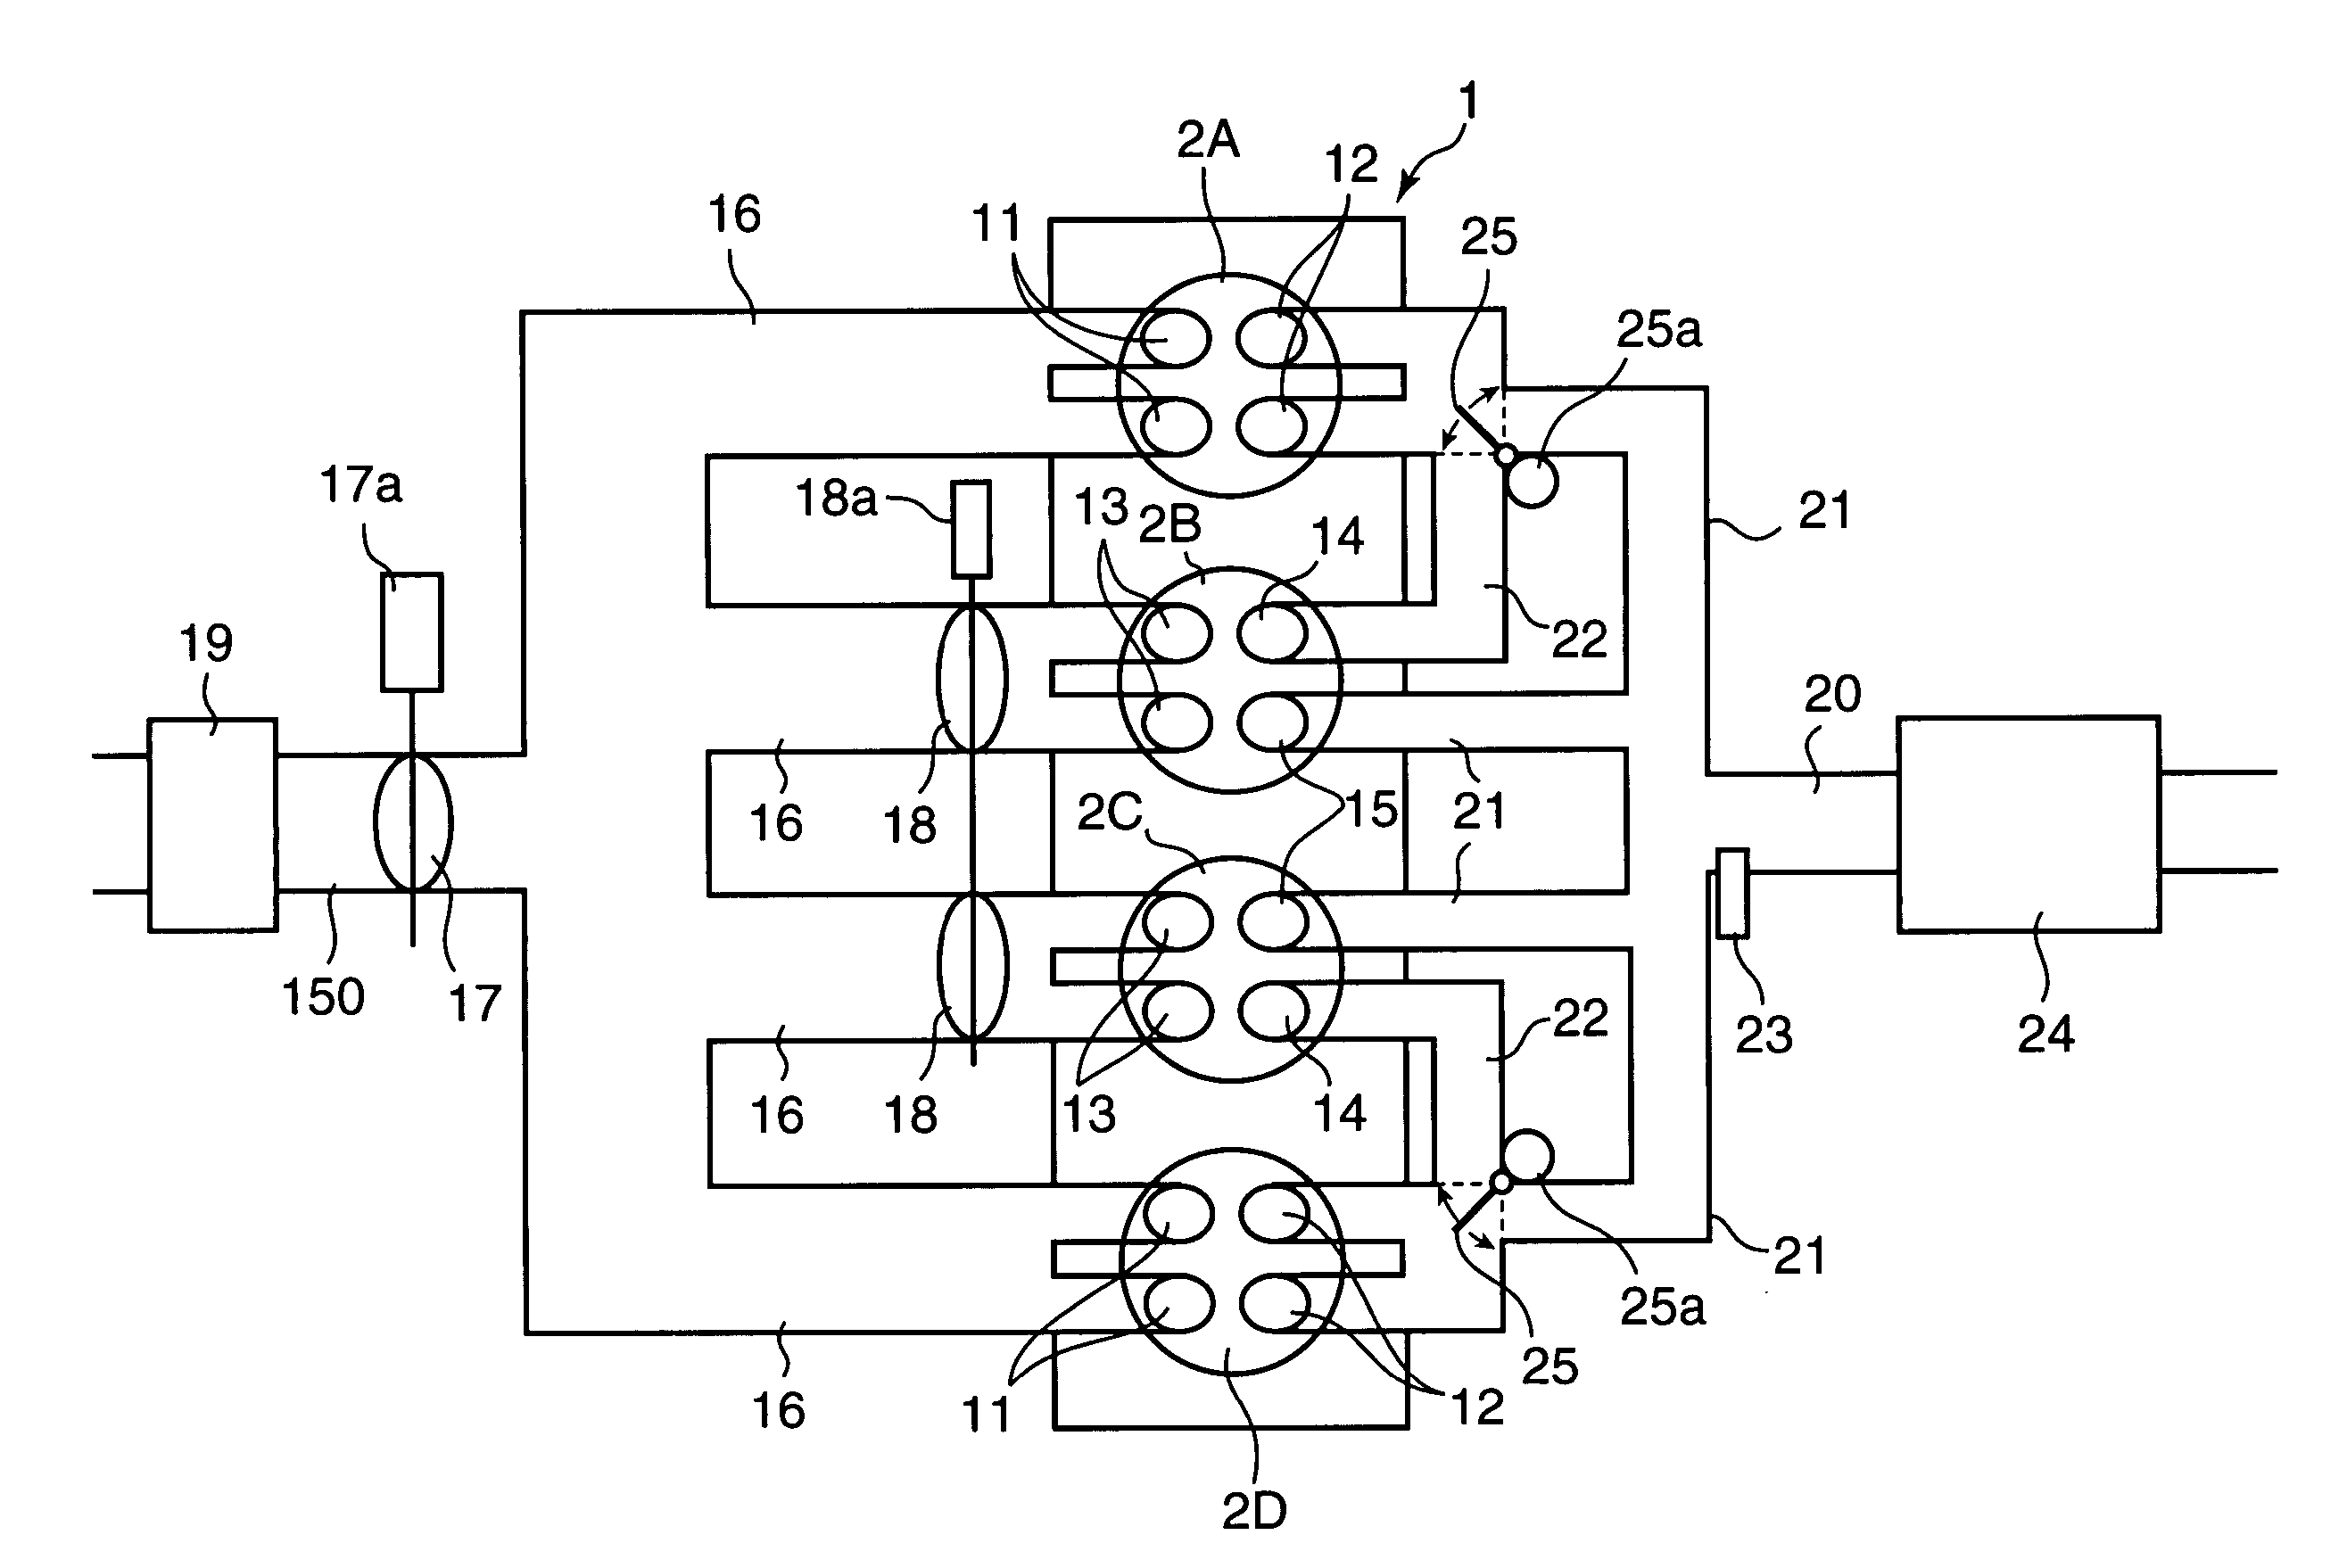 Control unit for spark ignition-type engine